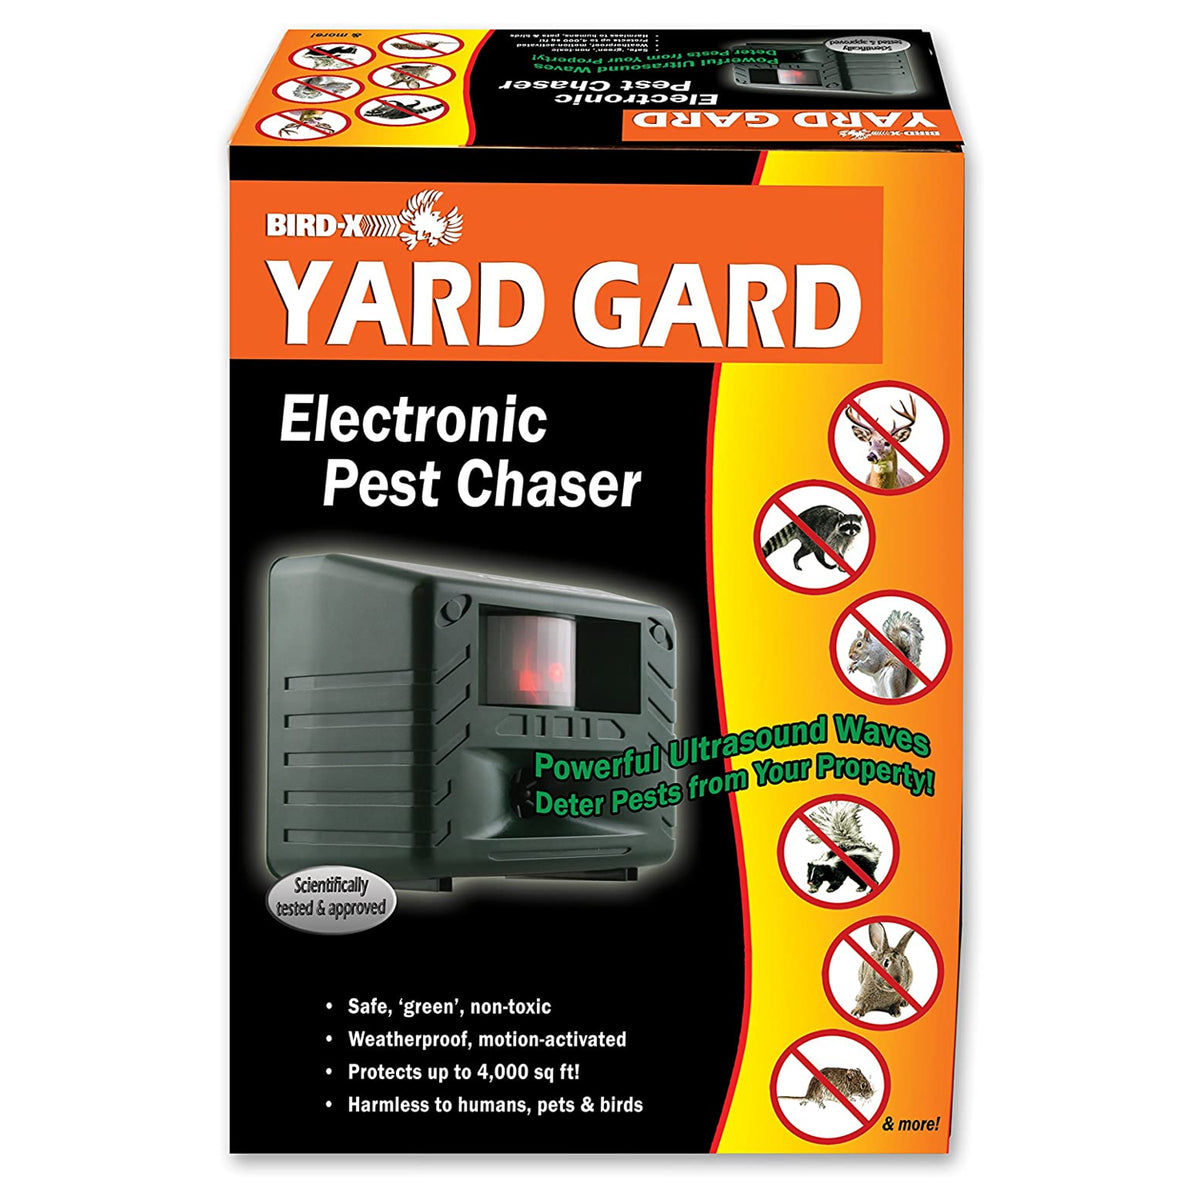 Bird-X YG Yard Guard Electronic Pest Chaser, Coverage Up To 4000 SqFt